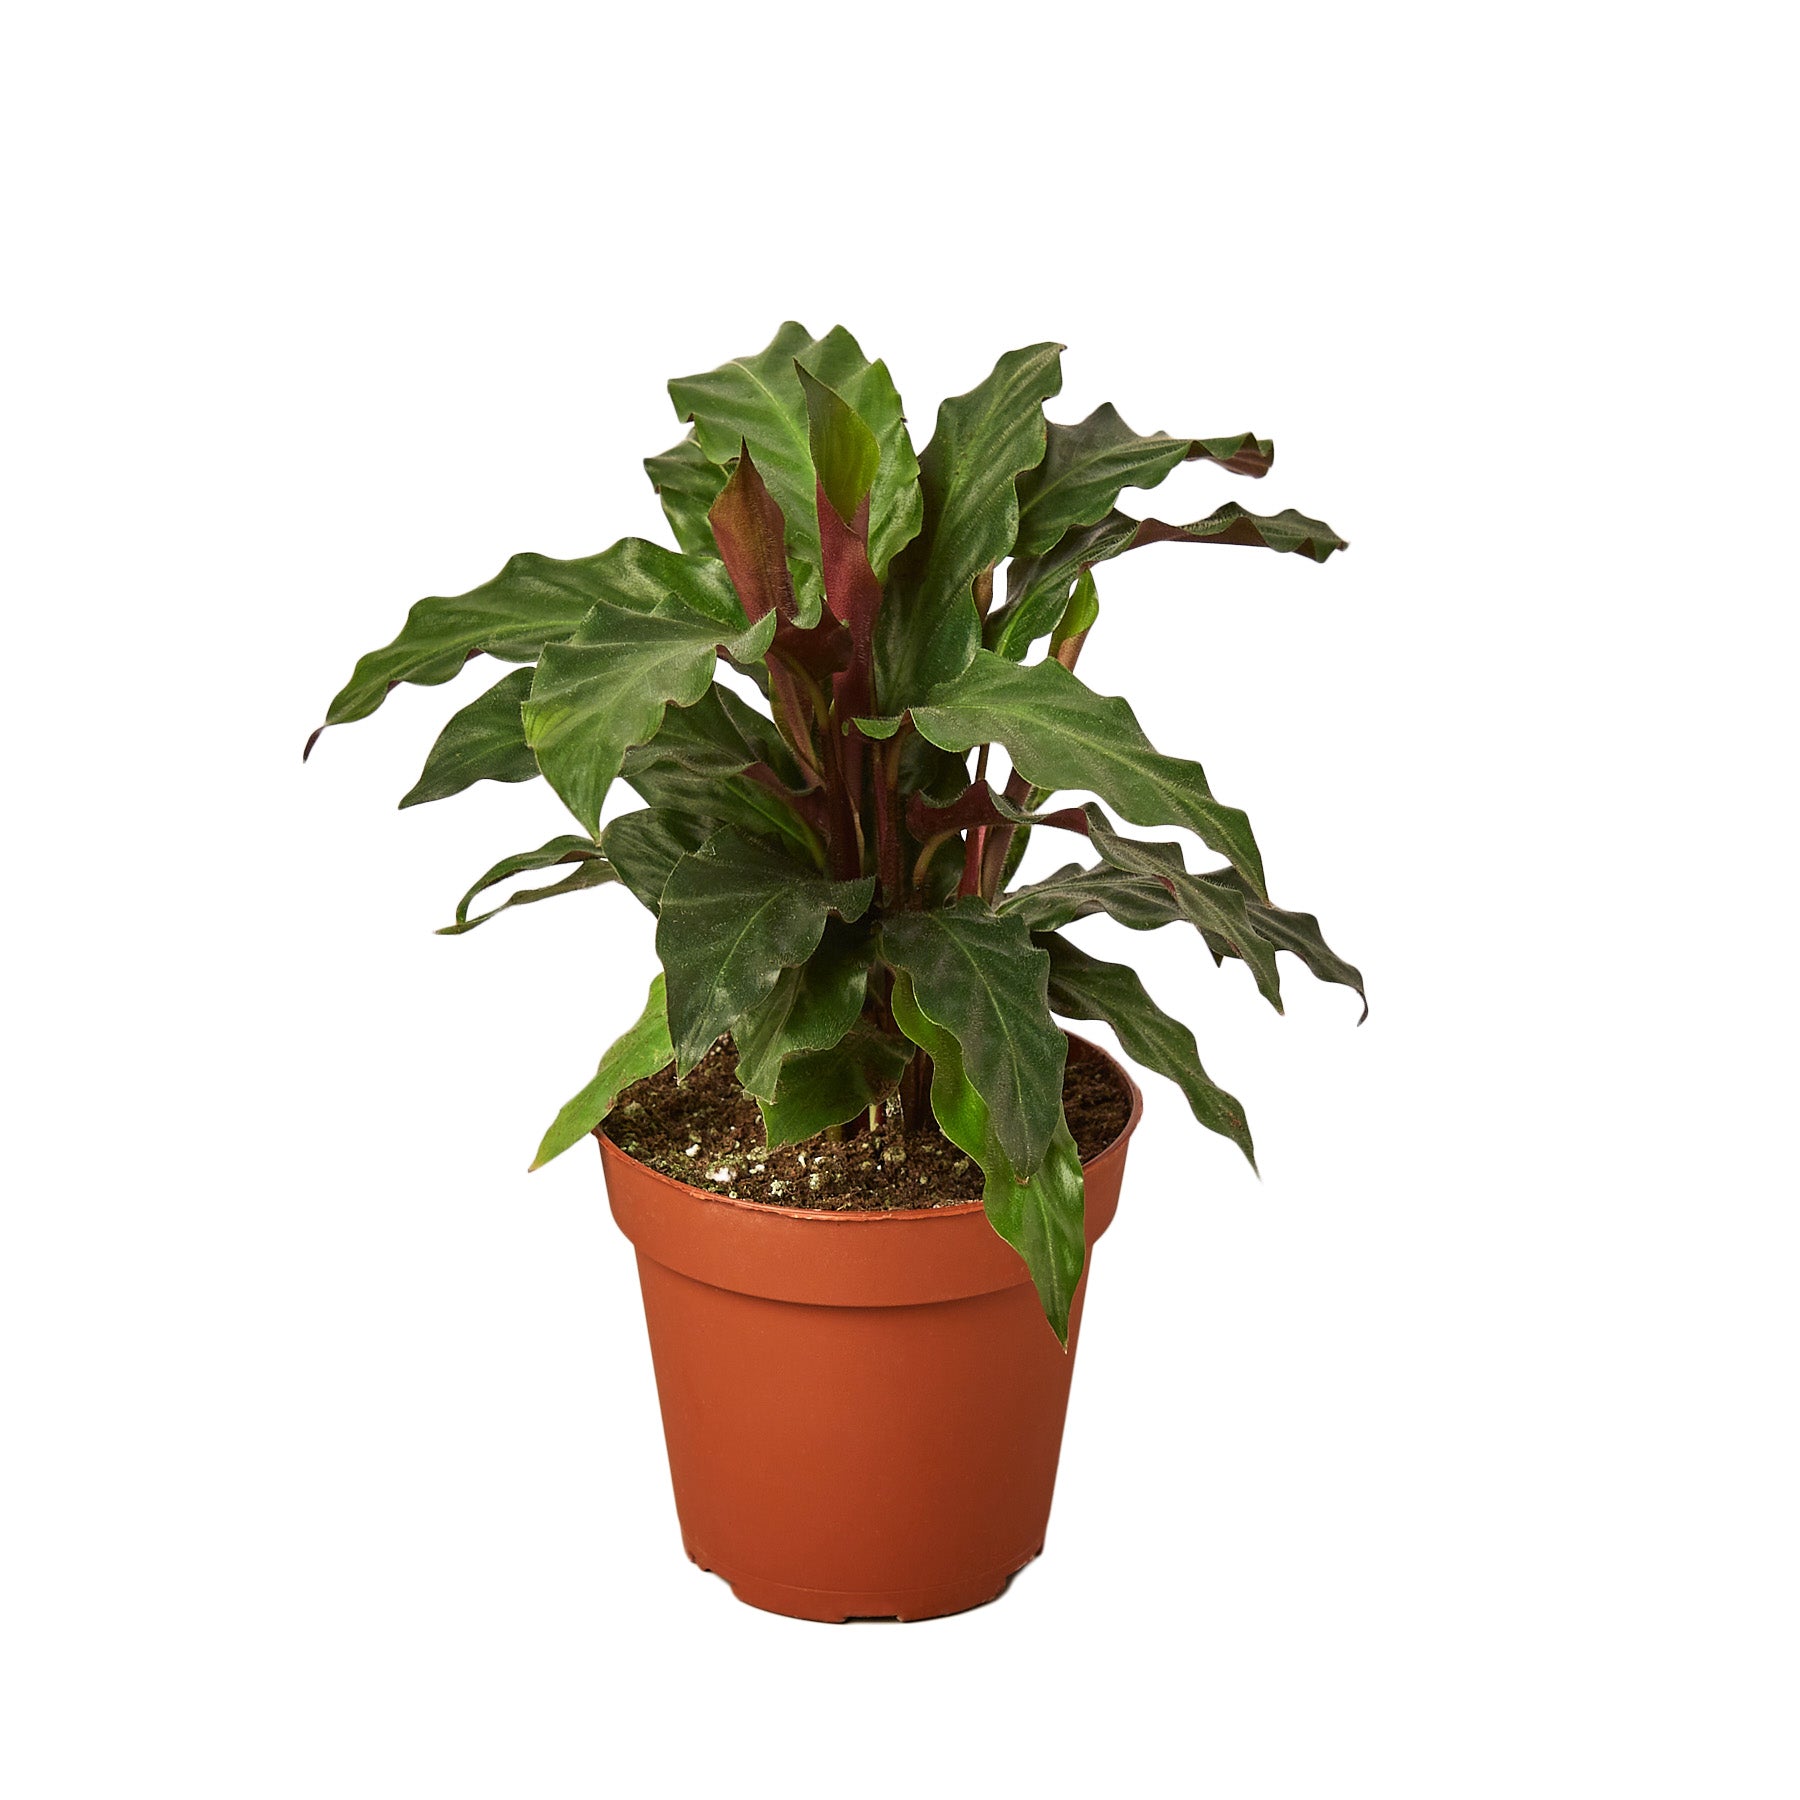 A potted plant on a white background from one of the top garden centers near me.